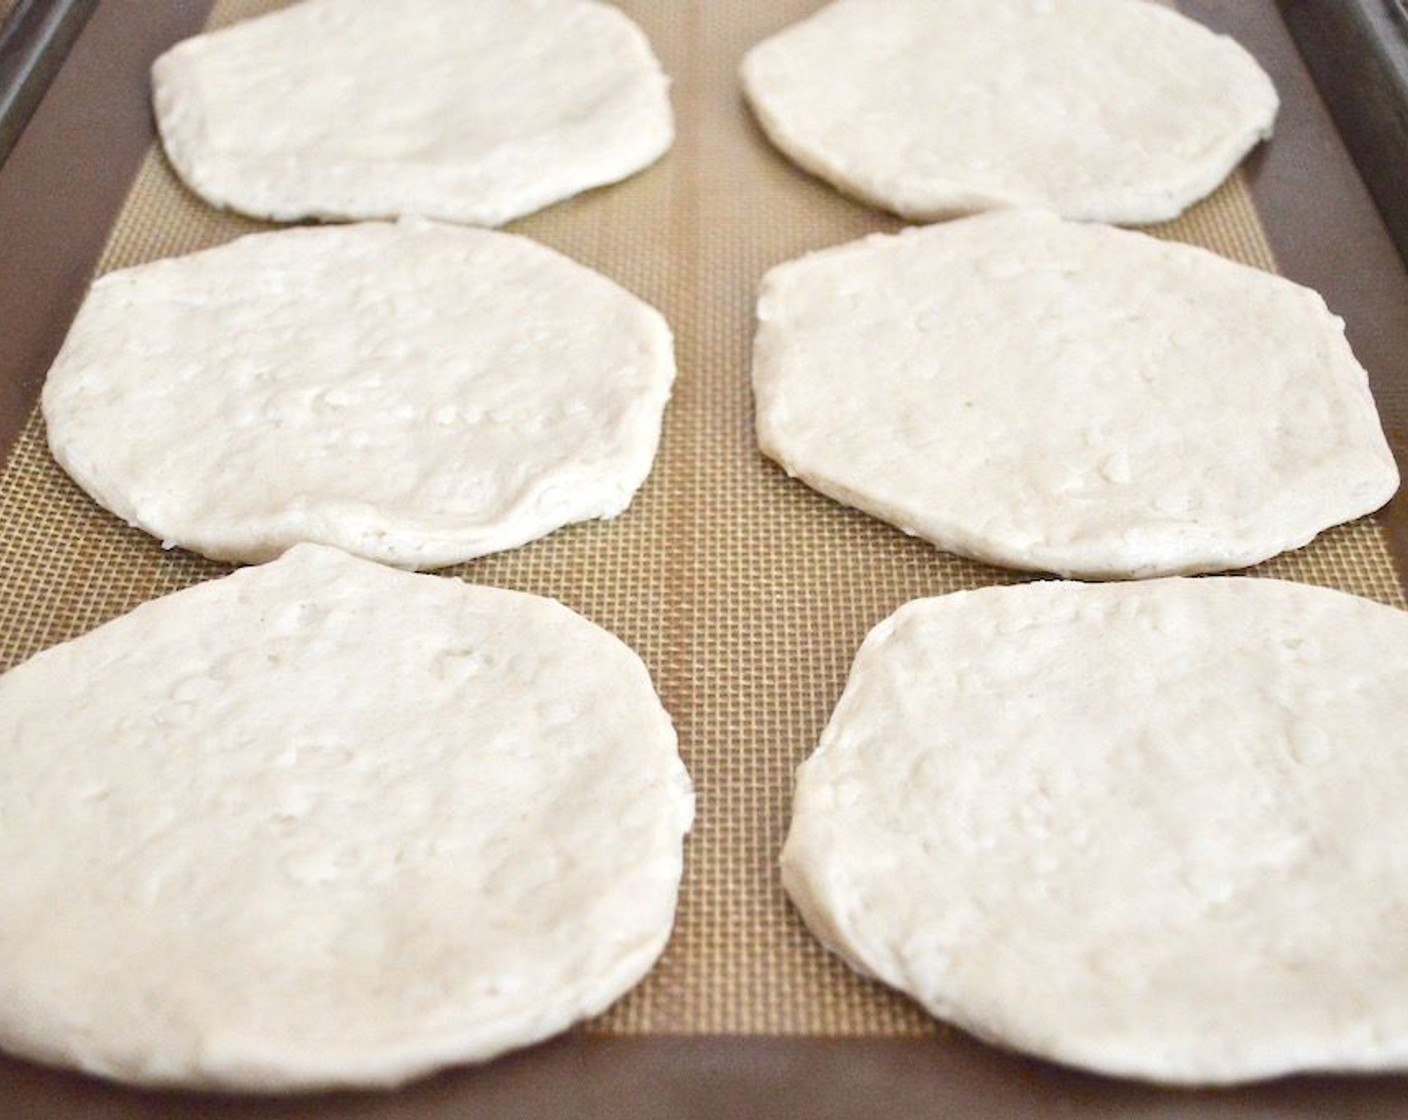 step 5 While the mixture simmers, take each Pillsbury Grands!™ Southern Style Biscuits (16) and lay them out on the lined sheet trays. Press them down firmly into thin discs and stretch them out a little.